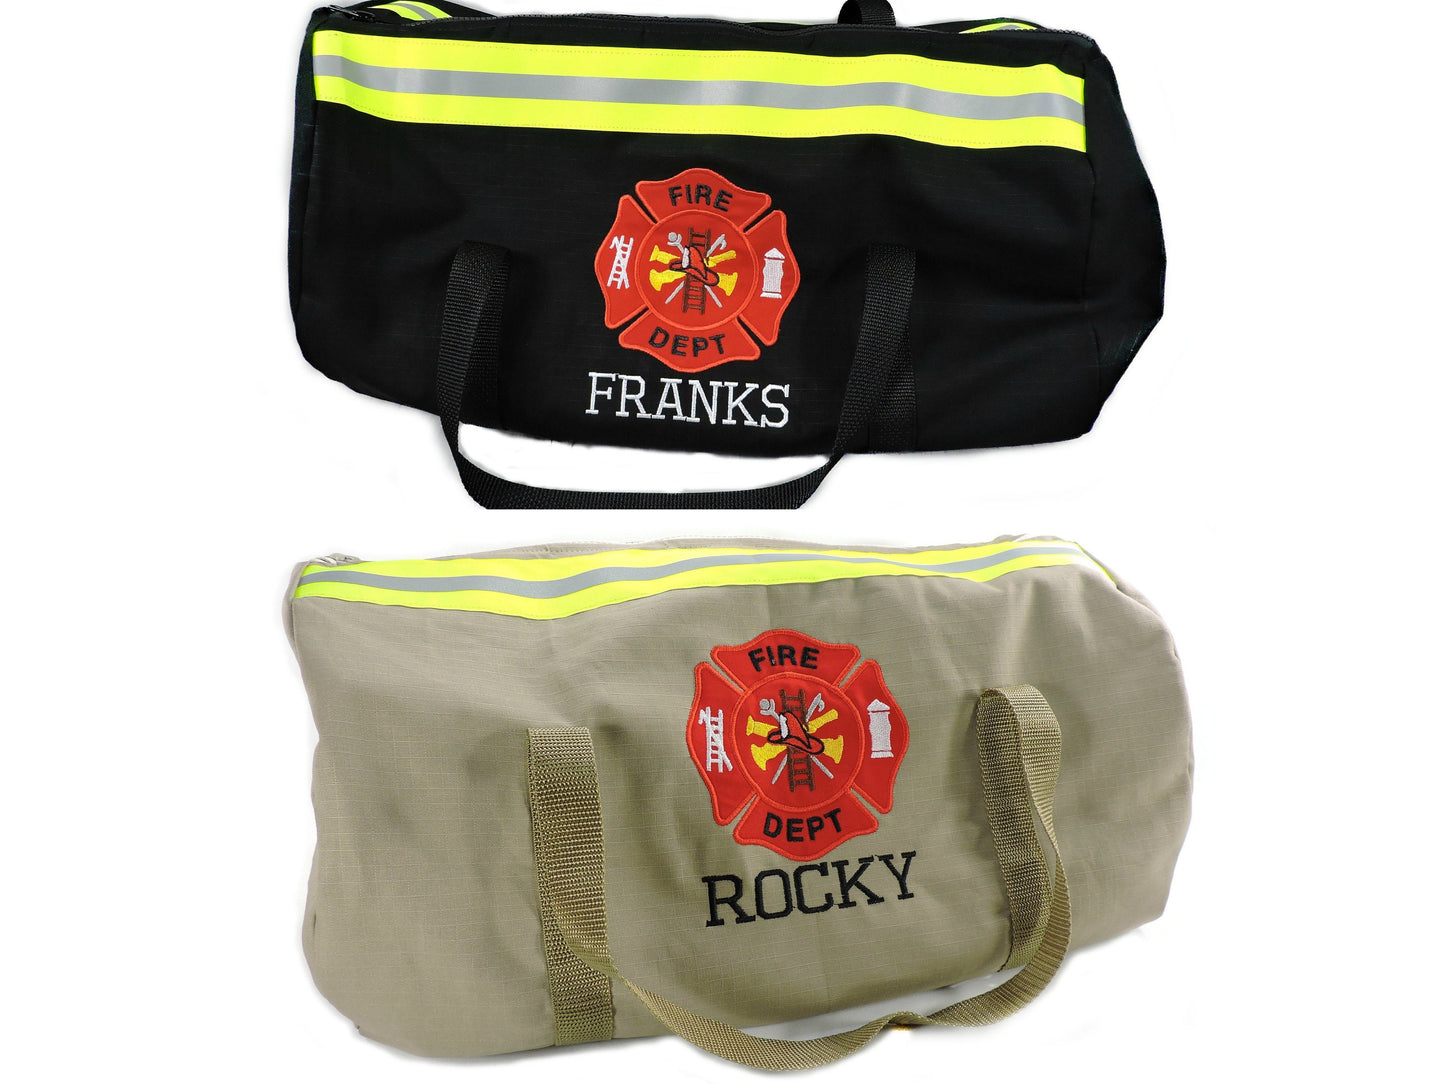 firefighter duffel with neon yellow tape